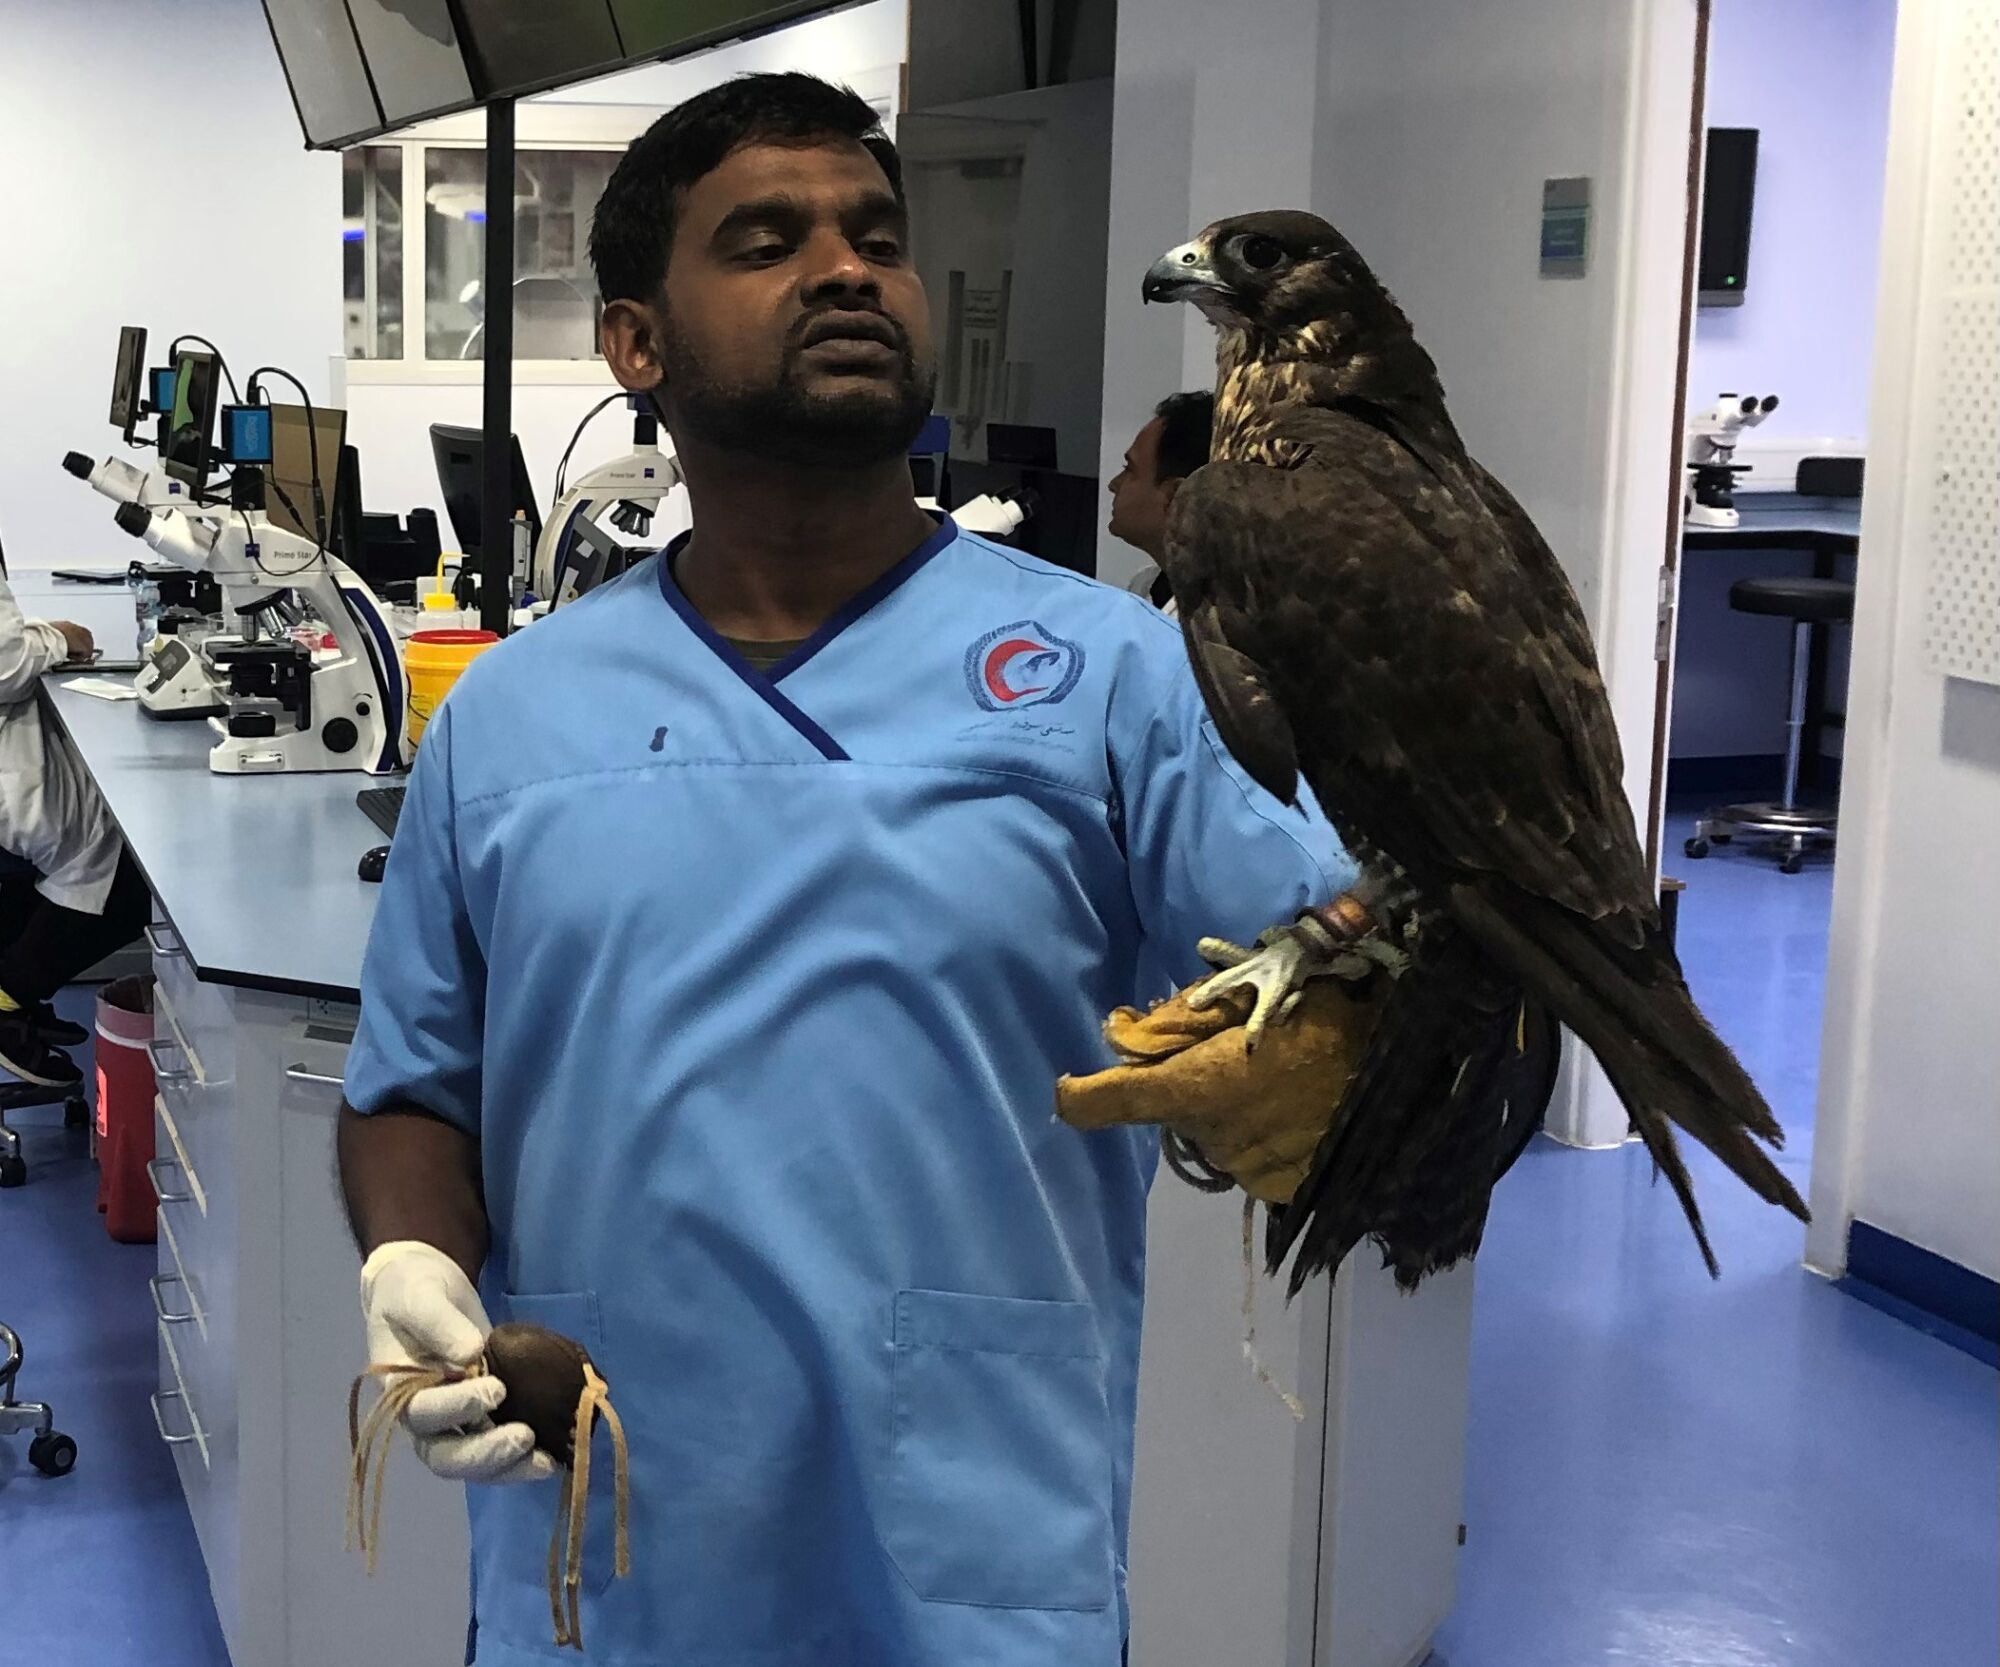 A doctor at the Souq Waqif Falcon Hospital in Doha, Qatar, examines a Falcon's arm.